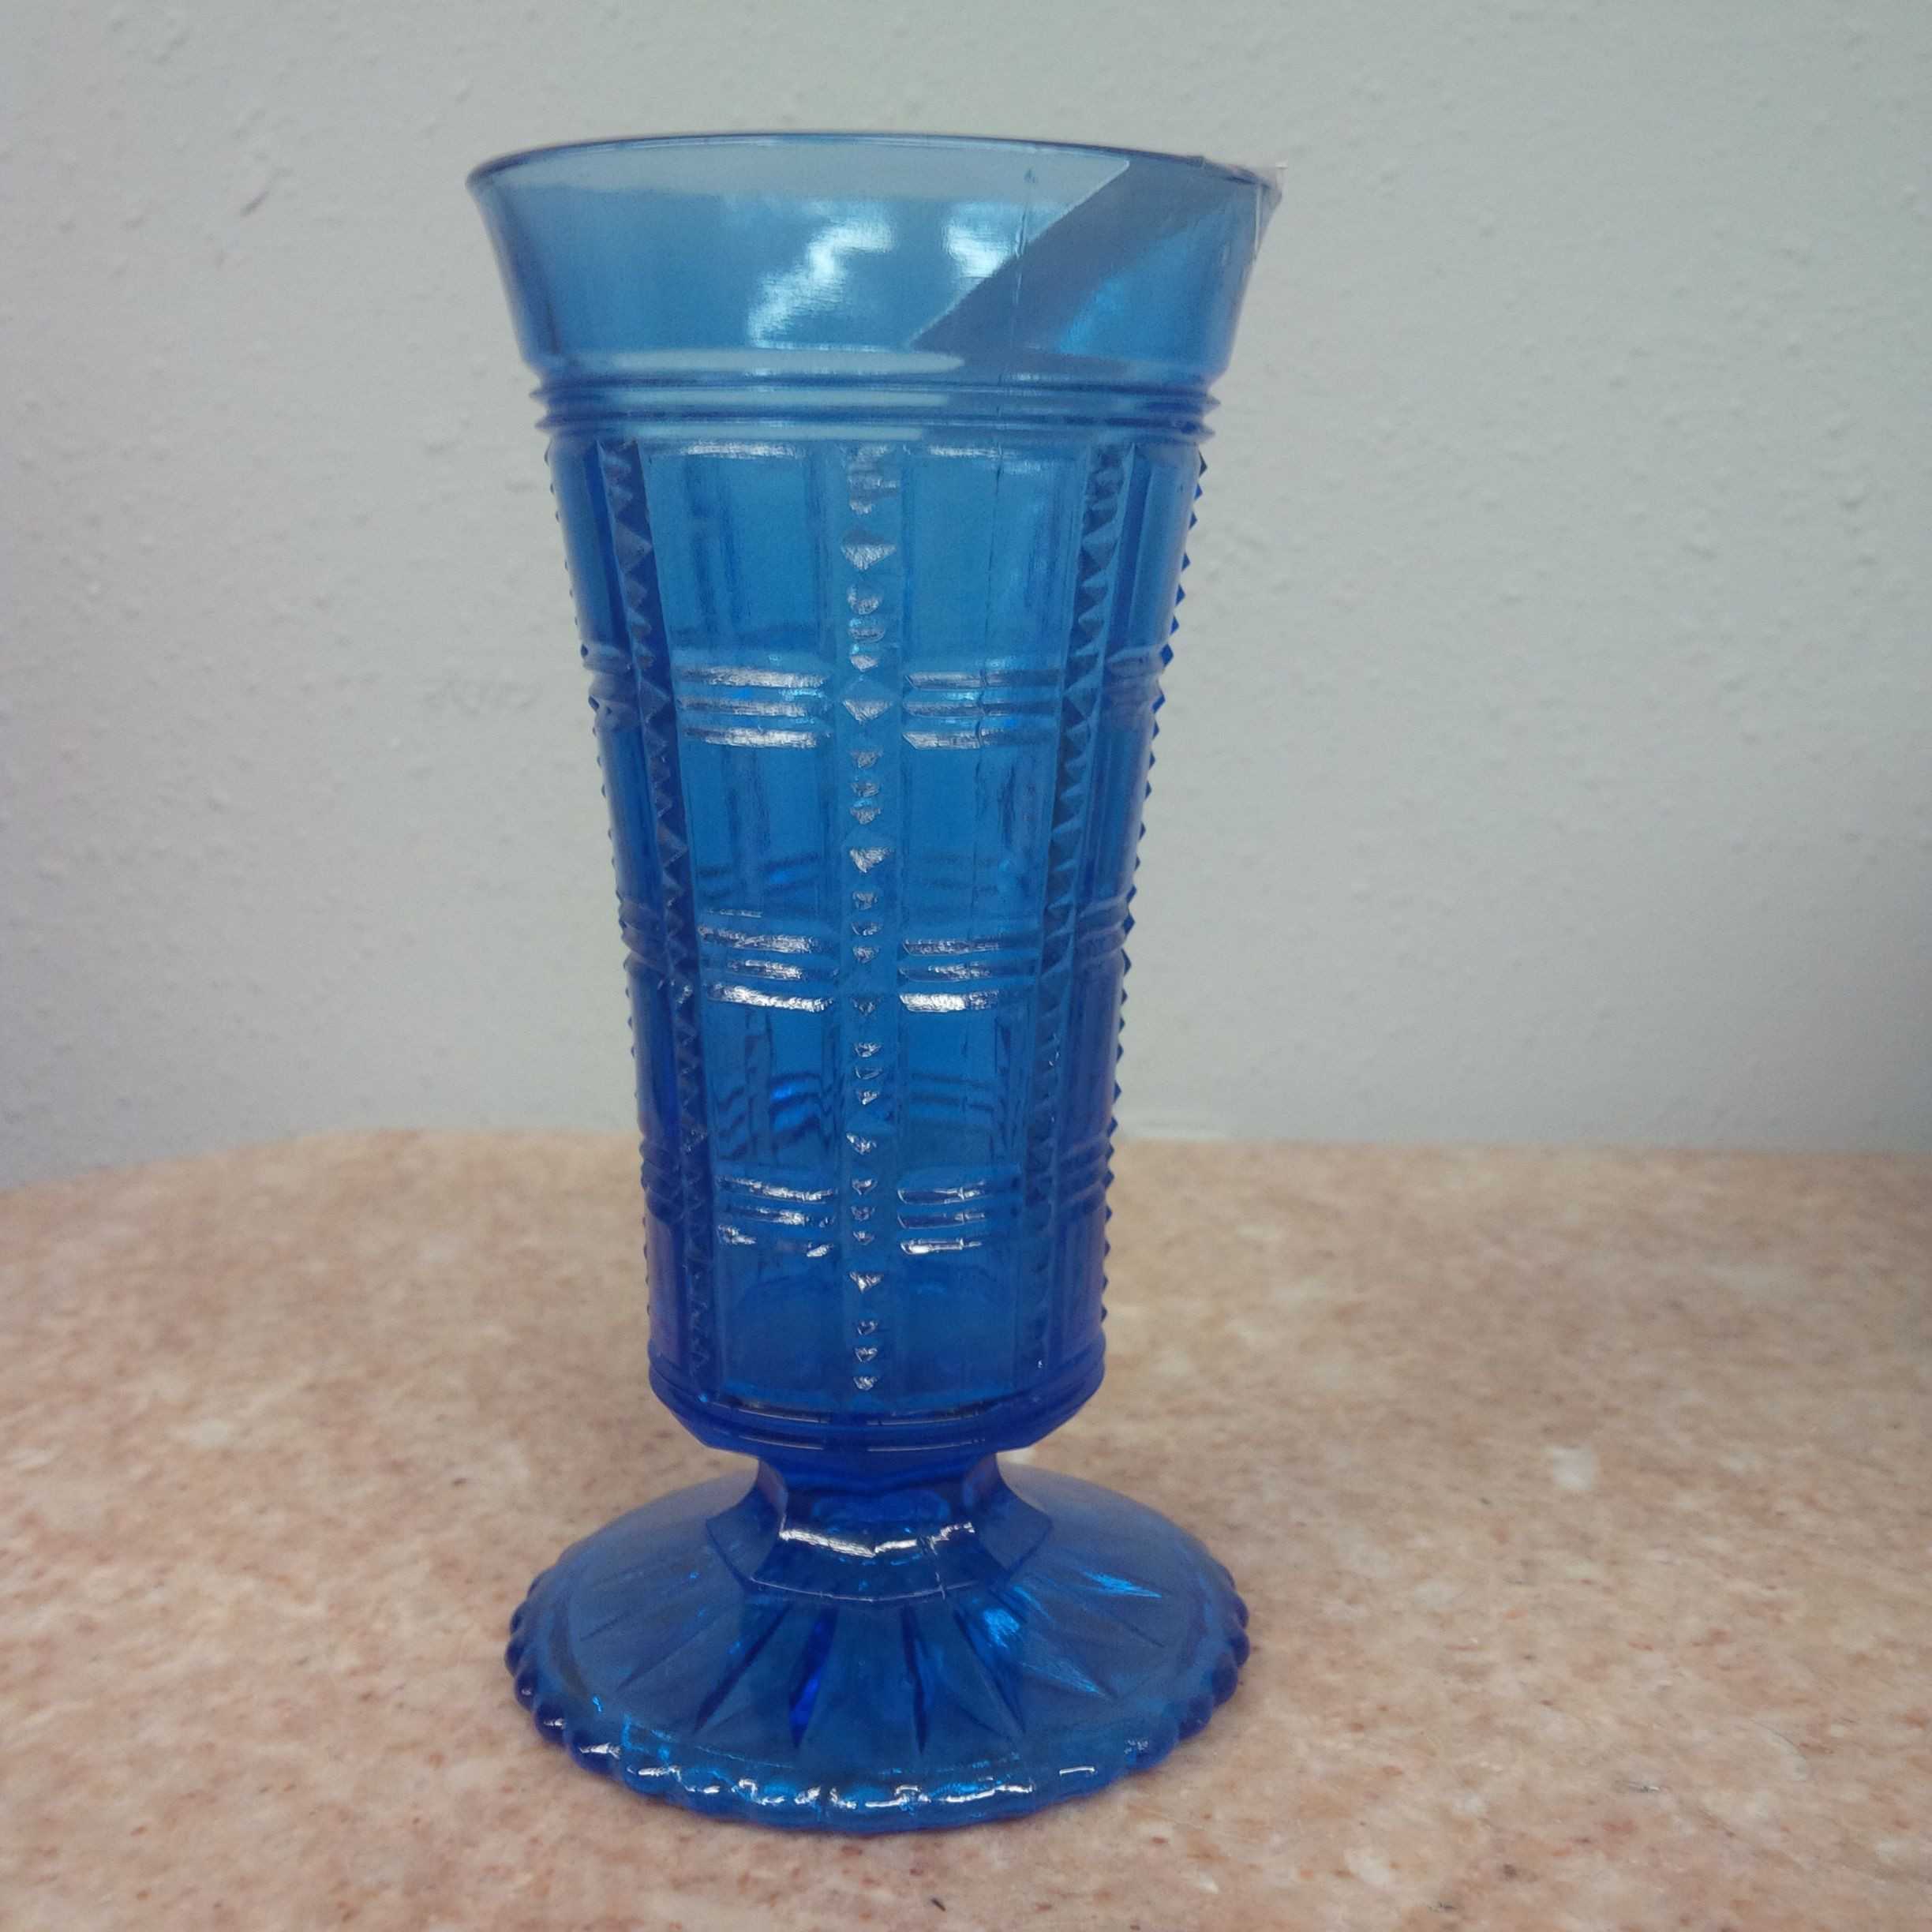 16 Glass Vase Of 23 Blue Crystal Vase the Weekly World Pertaining to Cobalt Blue Beaded Block Glass Vase Parfait by Imperial Glass Co